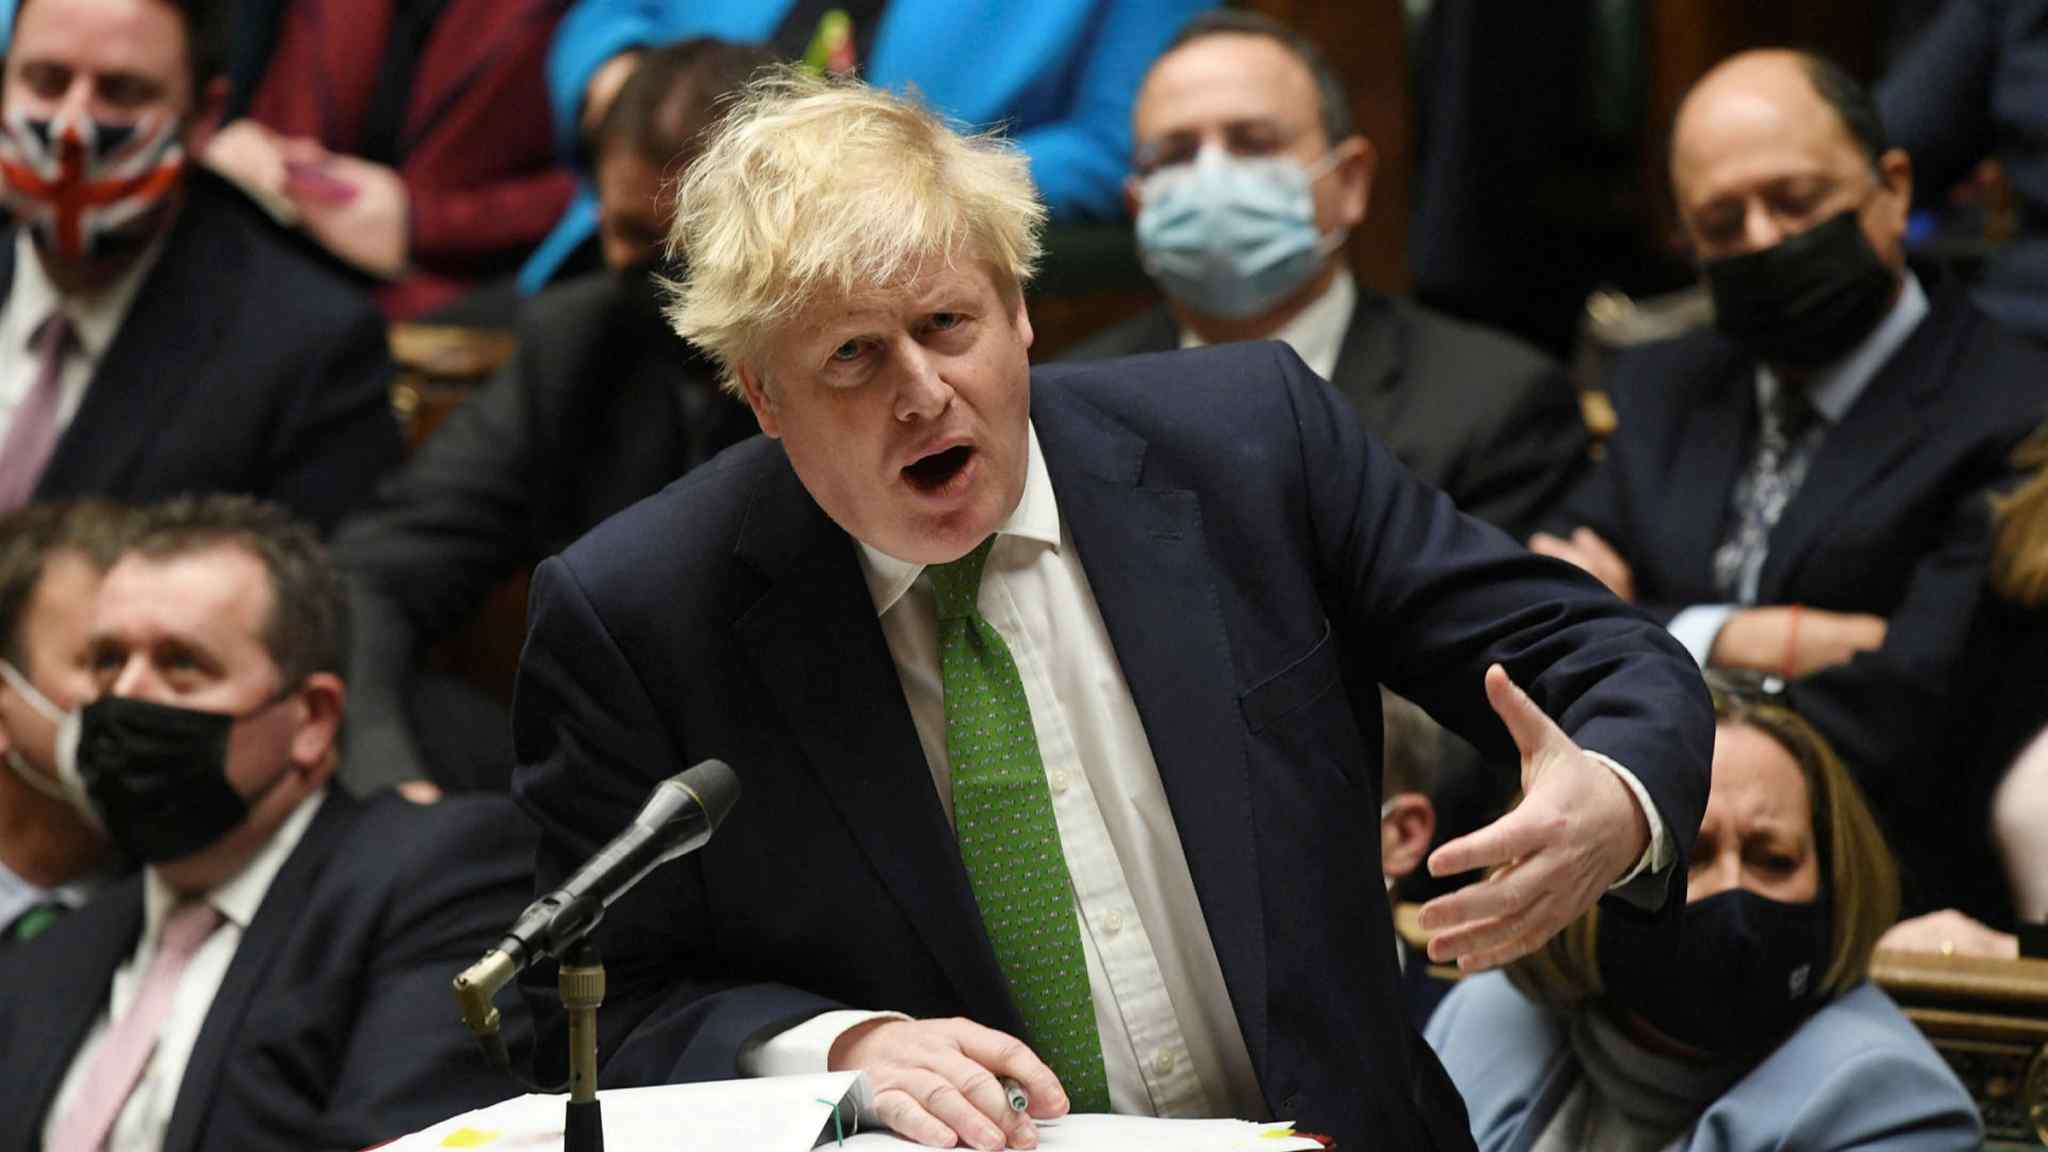 Johnson buys time as Tories rally behind embattled leader